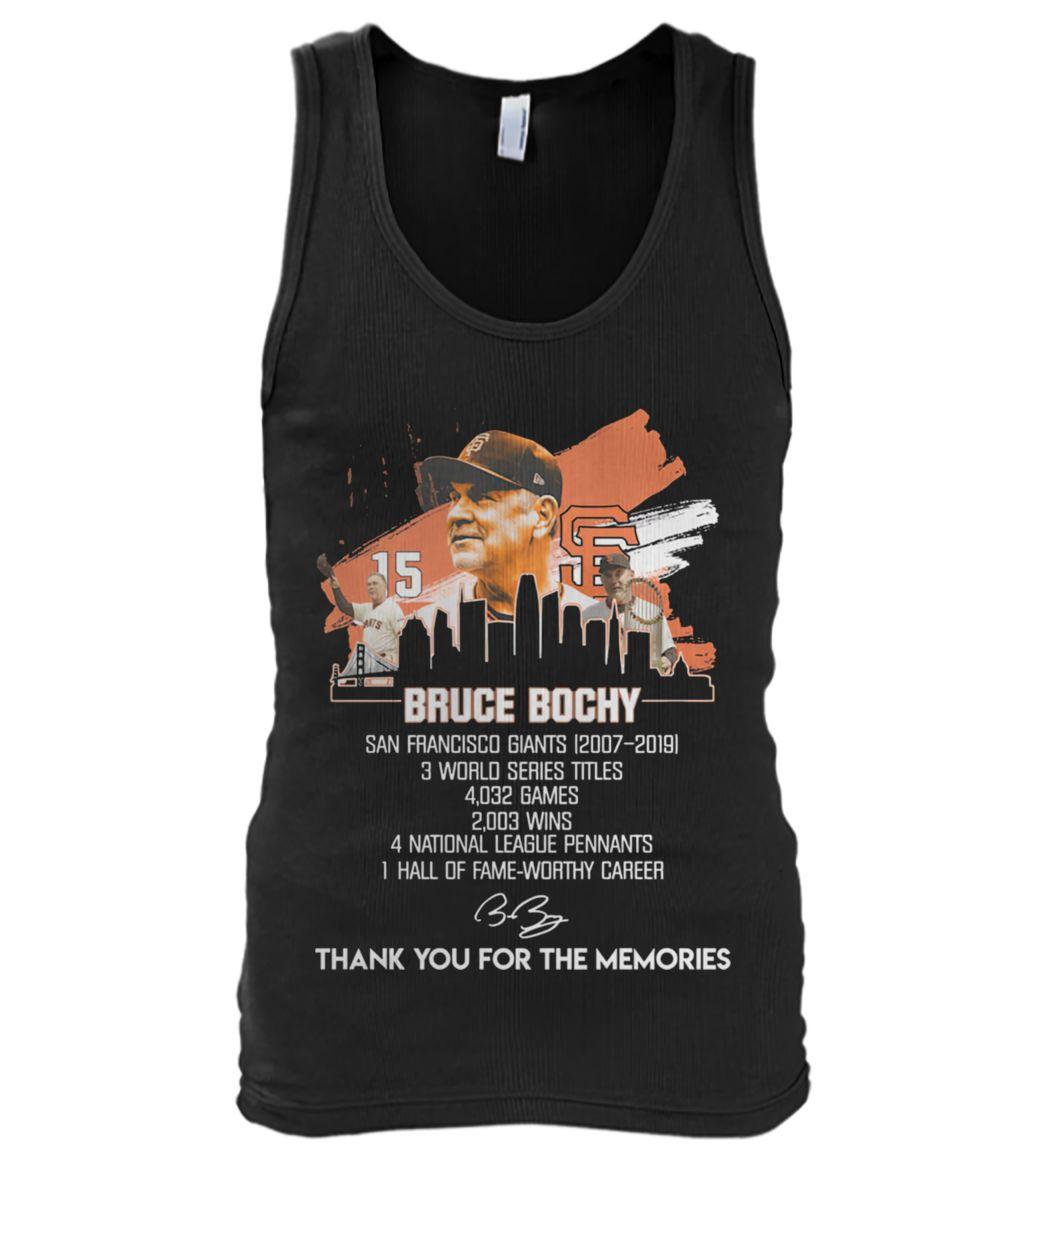 Bruce bochy san francisco giants 2007-2019 thank you for the memories tank top